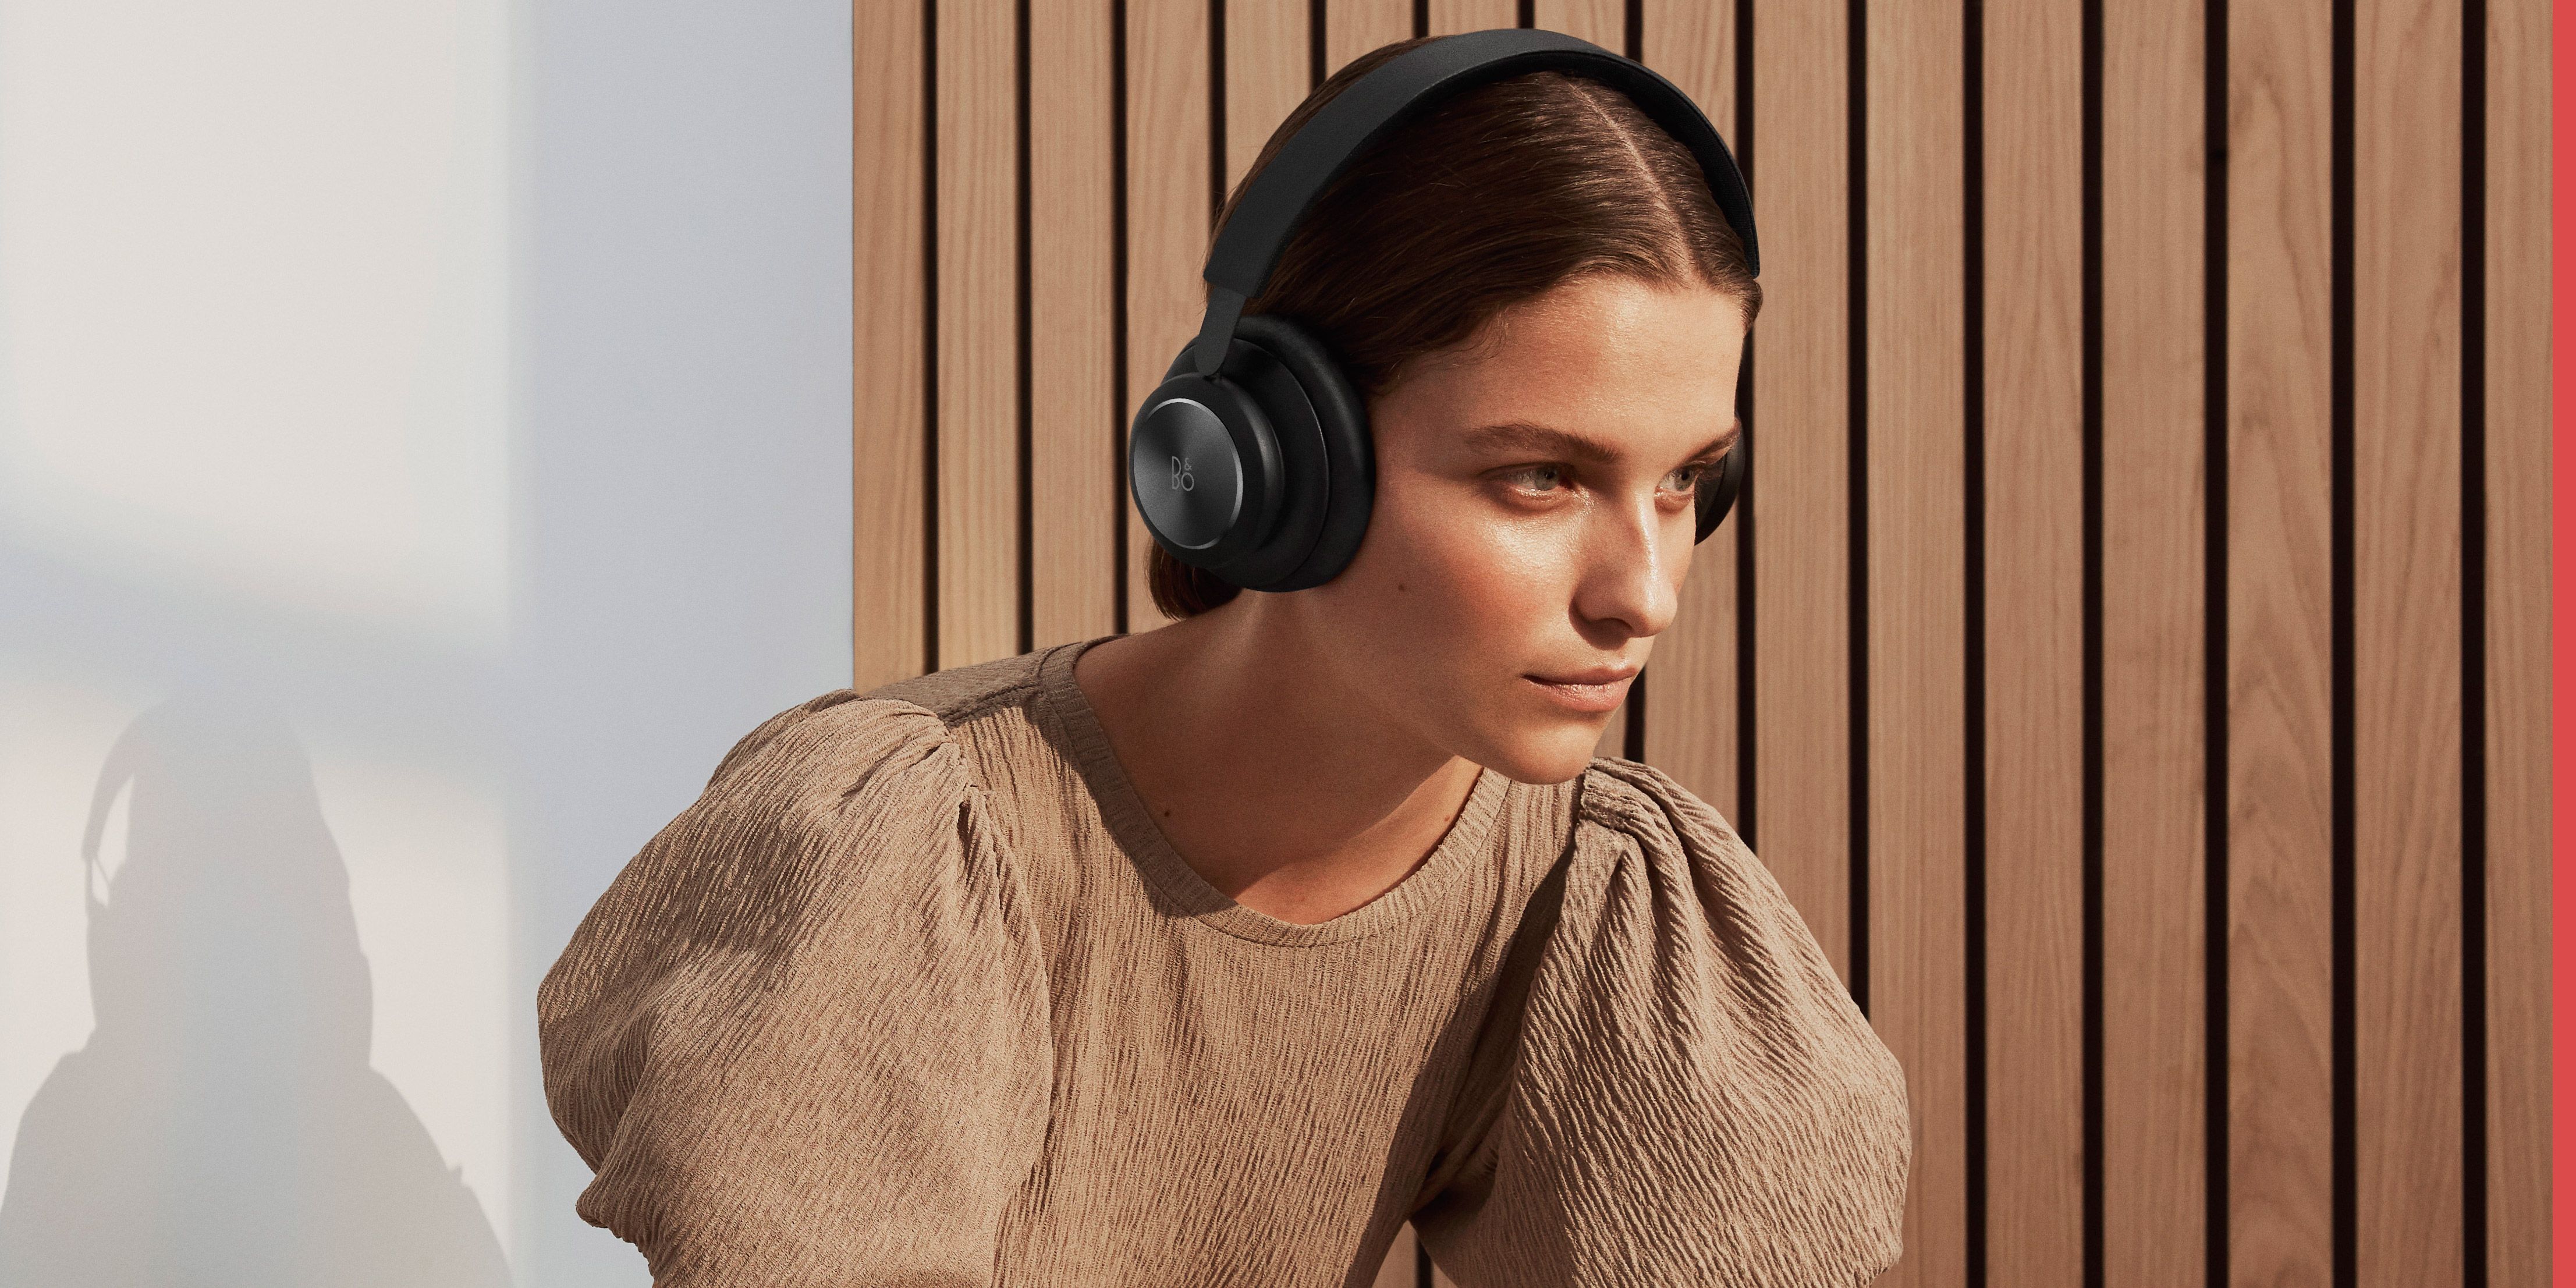 & Olufsen Beoplay H4 generation